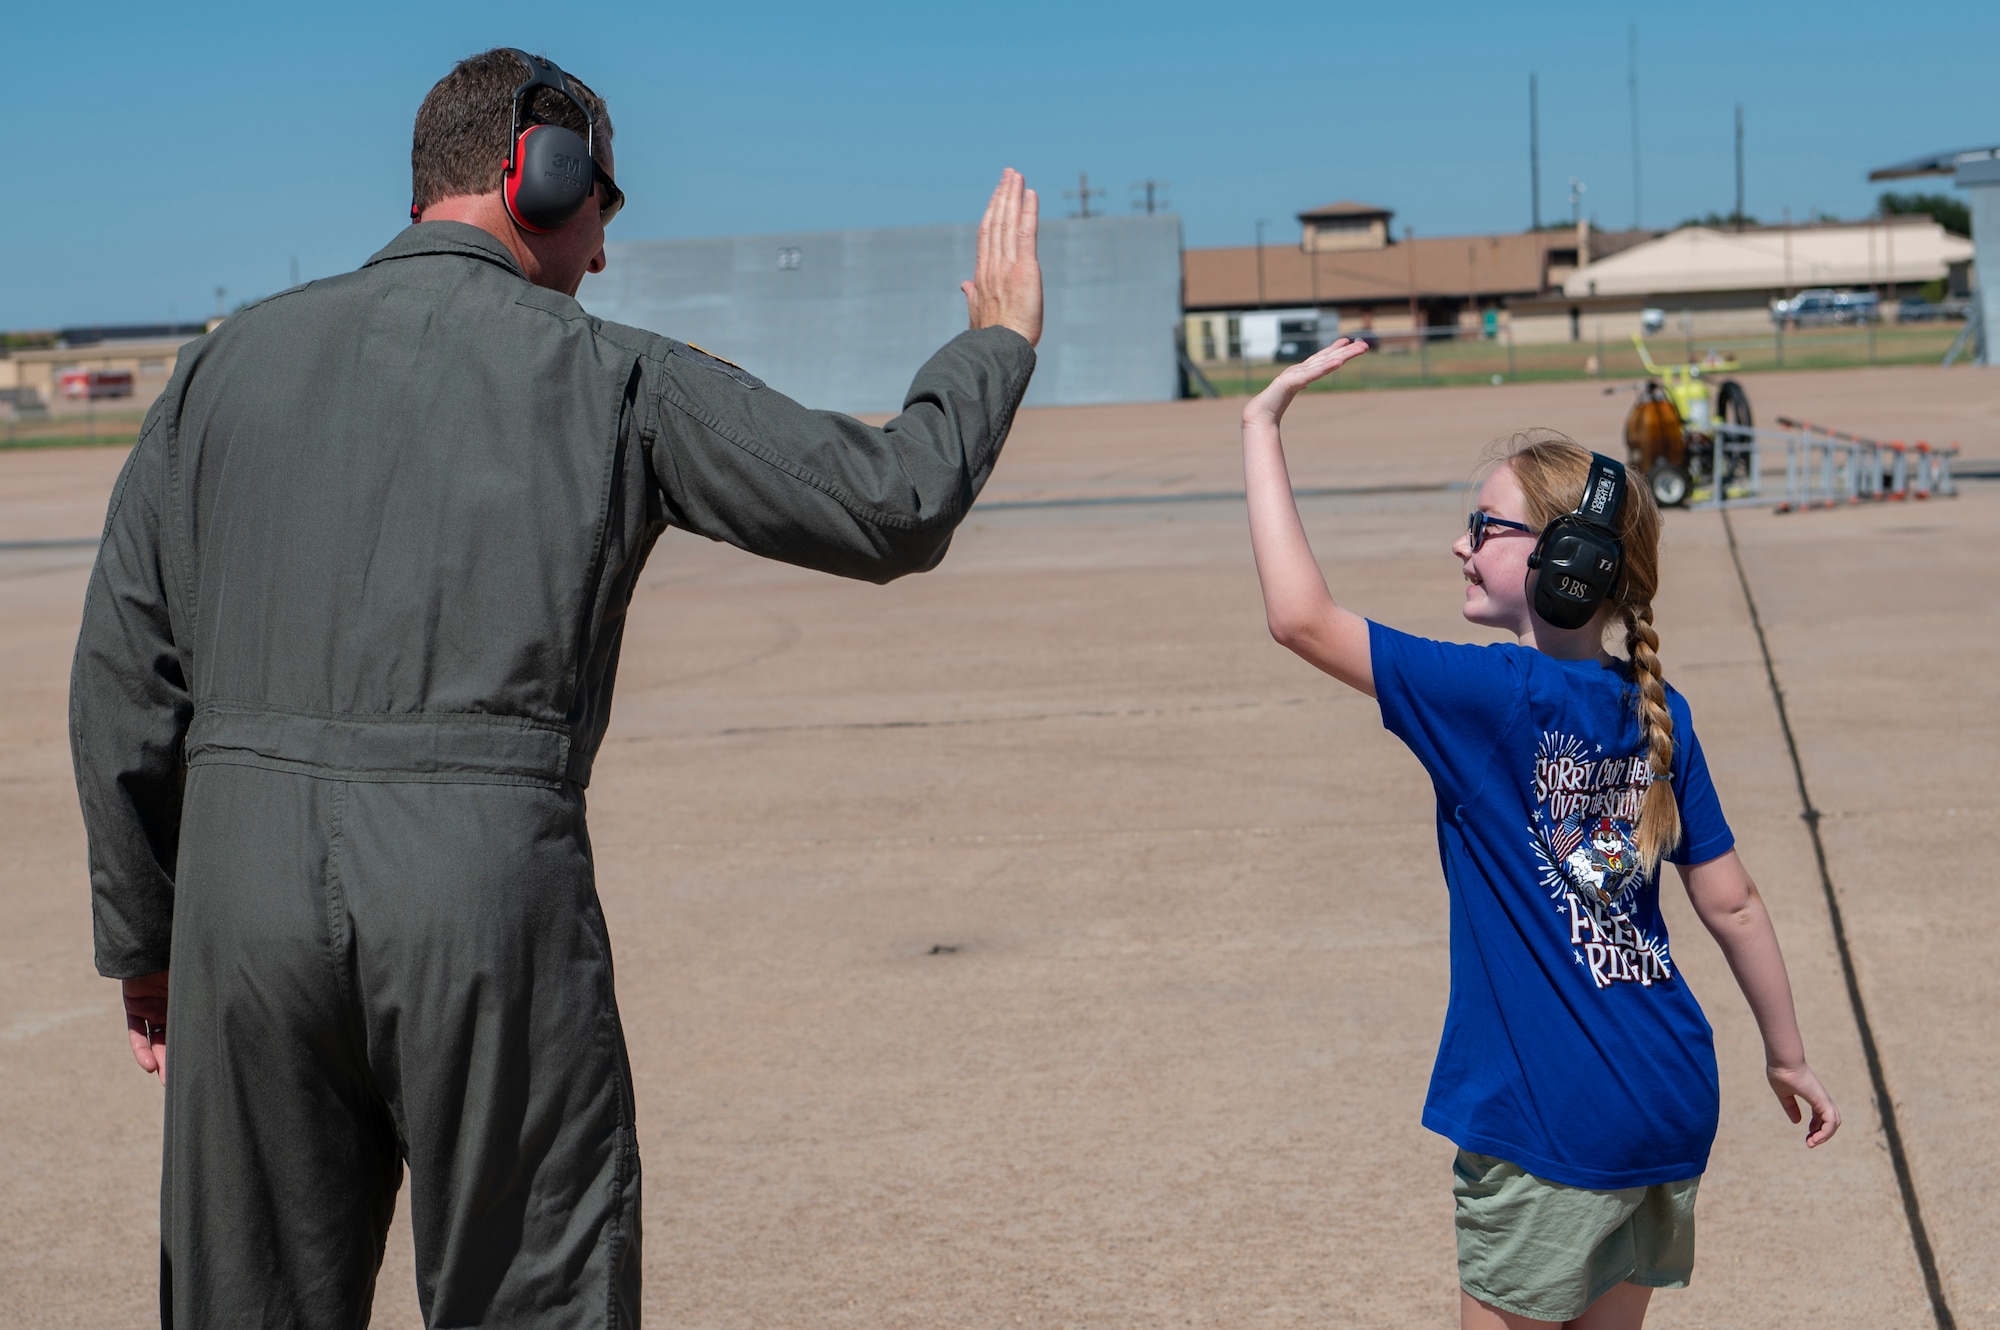 U.S. Air Force Col. Joseph Kramer, 7th Bomb Wing commander, high fives Jennifer Kippie, daughter of Col. Kevin Kippie, 7th BW vice commander, at Dyess Air Force Base, Texas, June 29, 2023. Kippie served at Dyess from June 11, 2021, to June 16, 2023. While at Dyess, Kippie was committed to excellence as he fostered financial innovation and proposals for the installation, created a Wing Welcome Center for new Airmen and worked in integrated teams to action the wing’s fiscal efforts. (U.S. Air Force photo by Senior Airman Ryan Hayman)